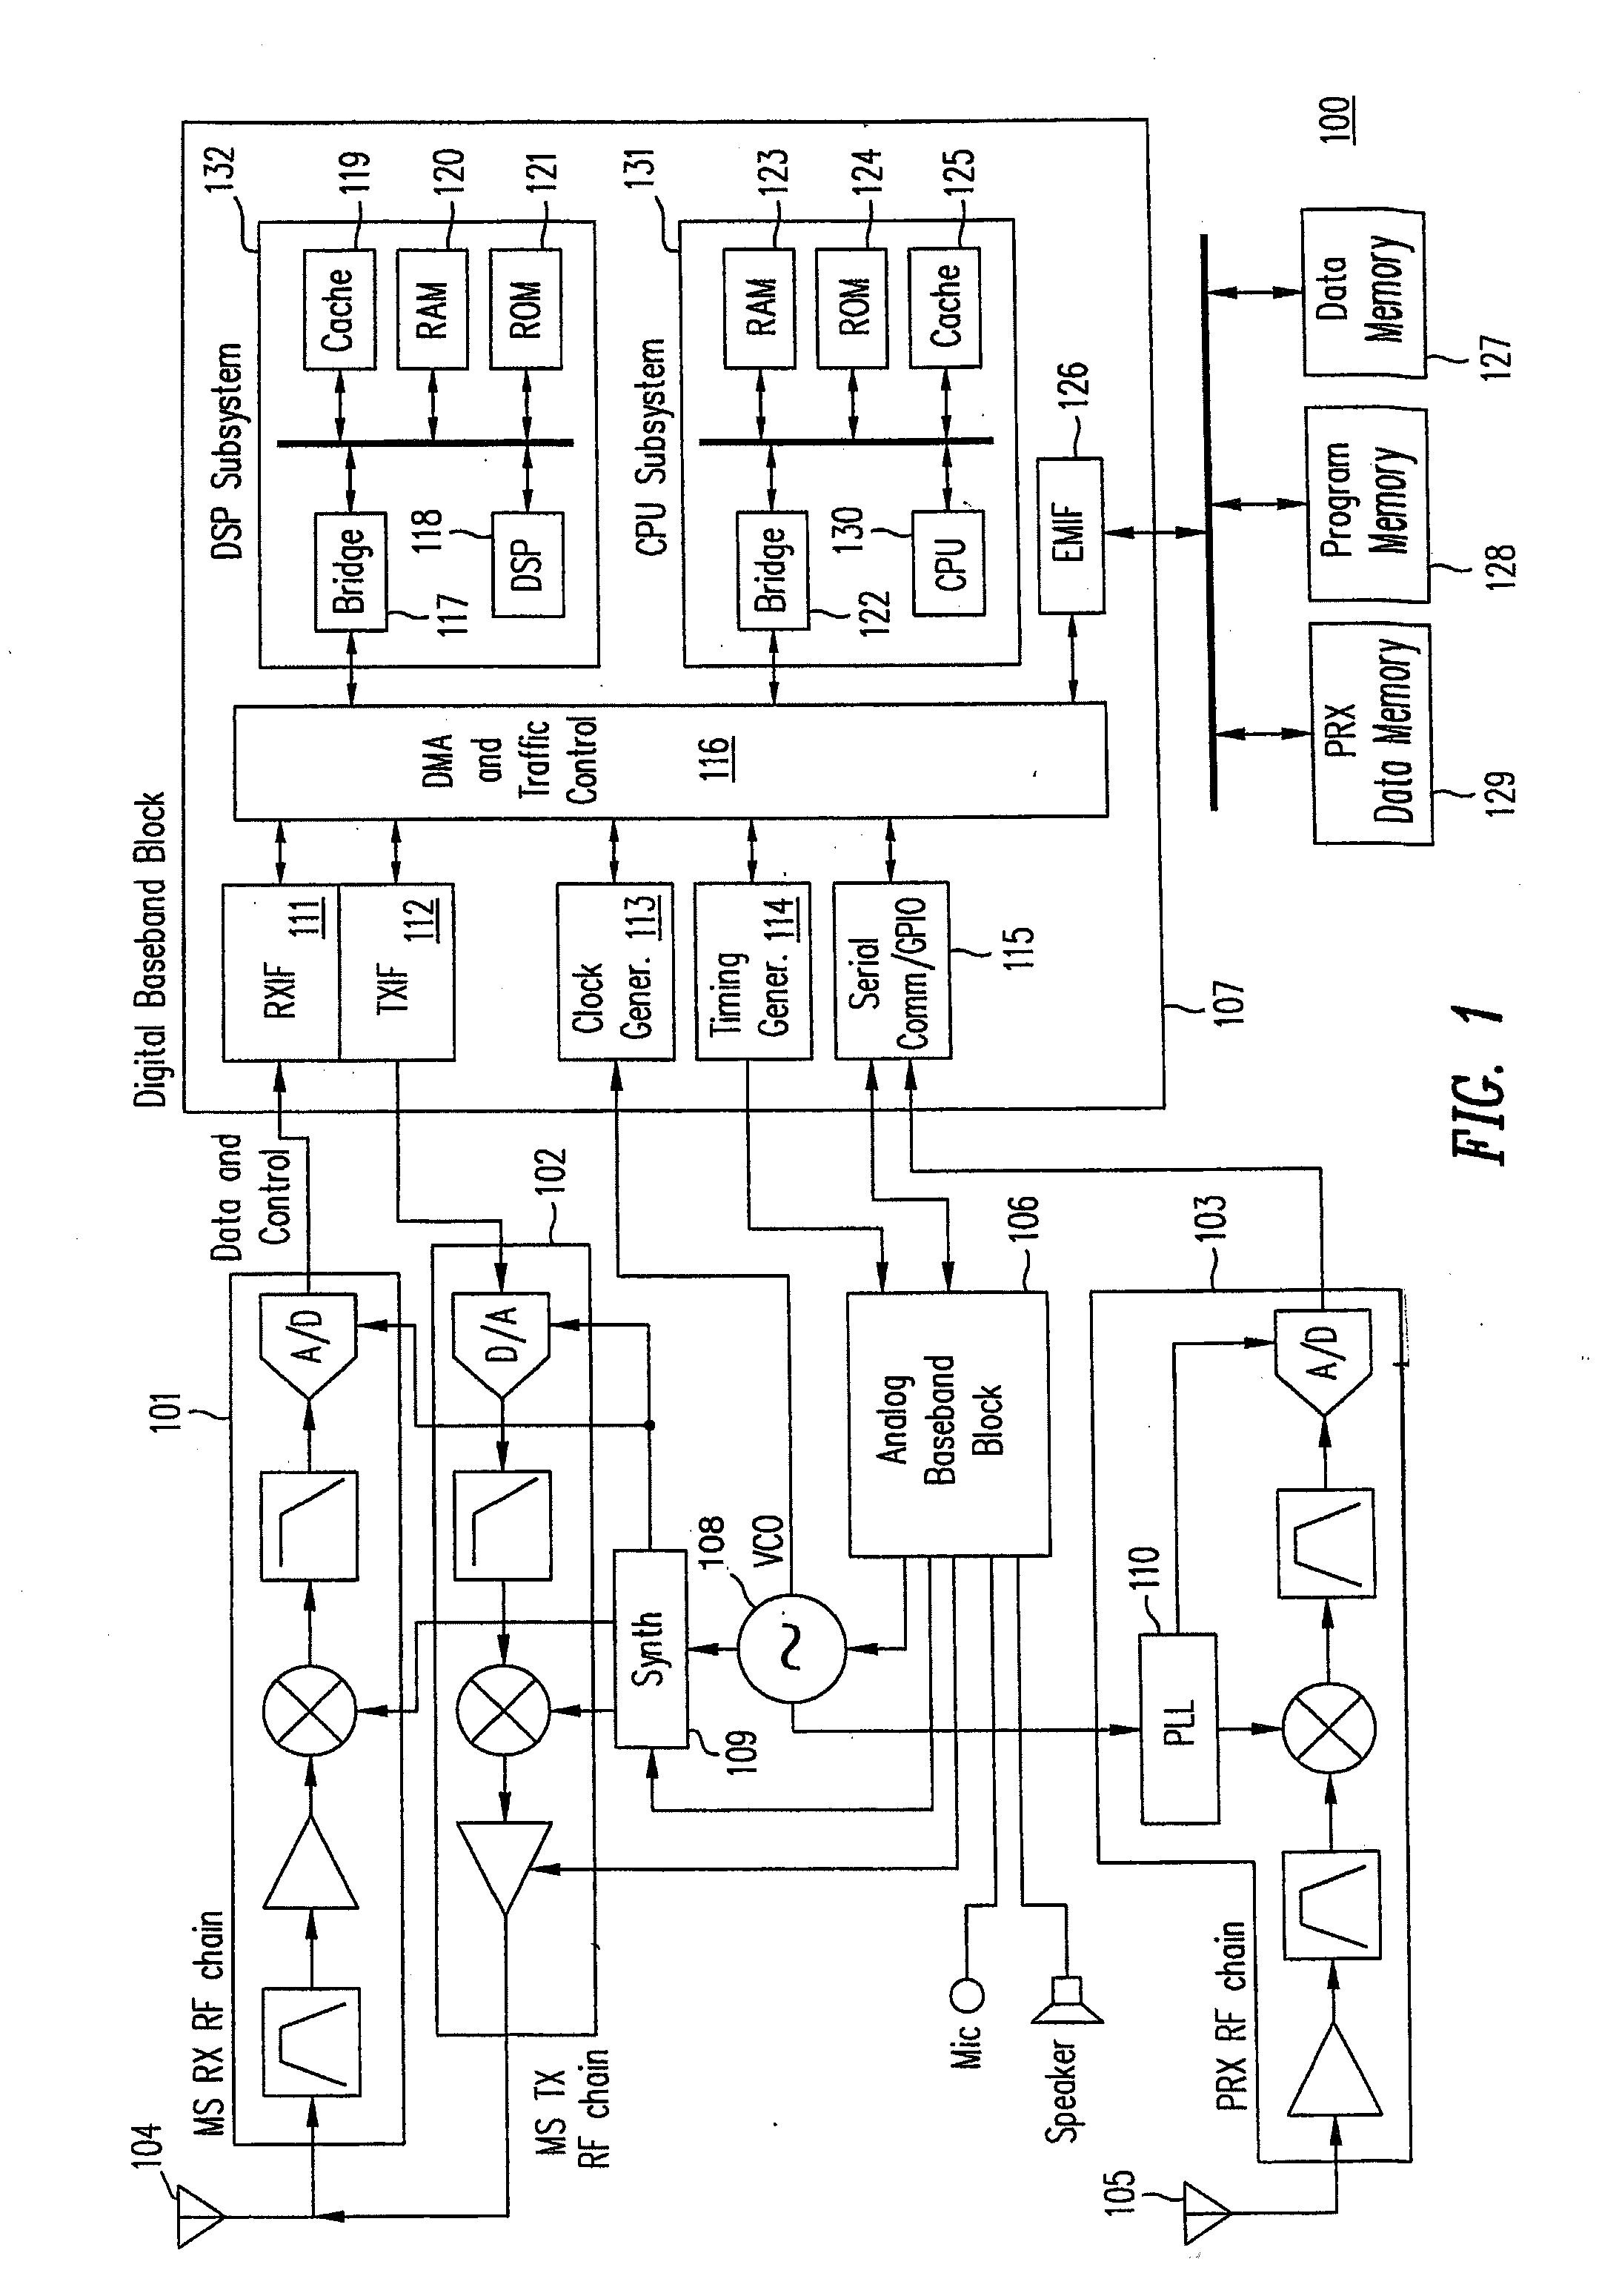 Compensation for Frequency Adjustment in Mobile Communication-Positioning Device With Shared Oscillator